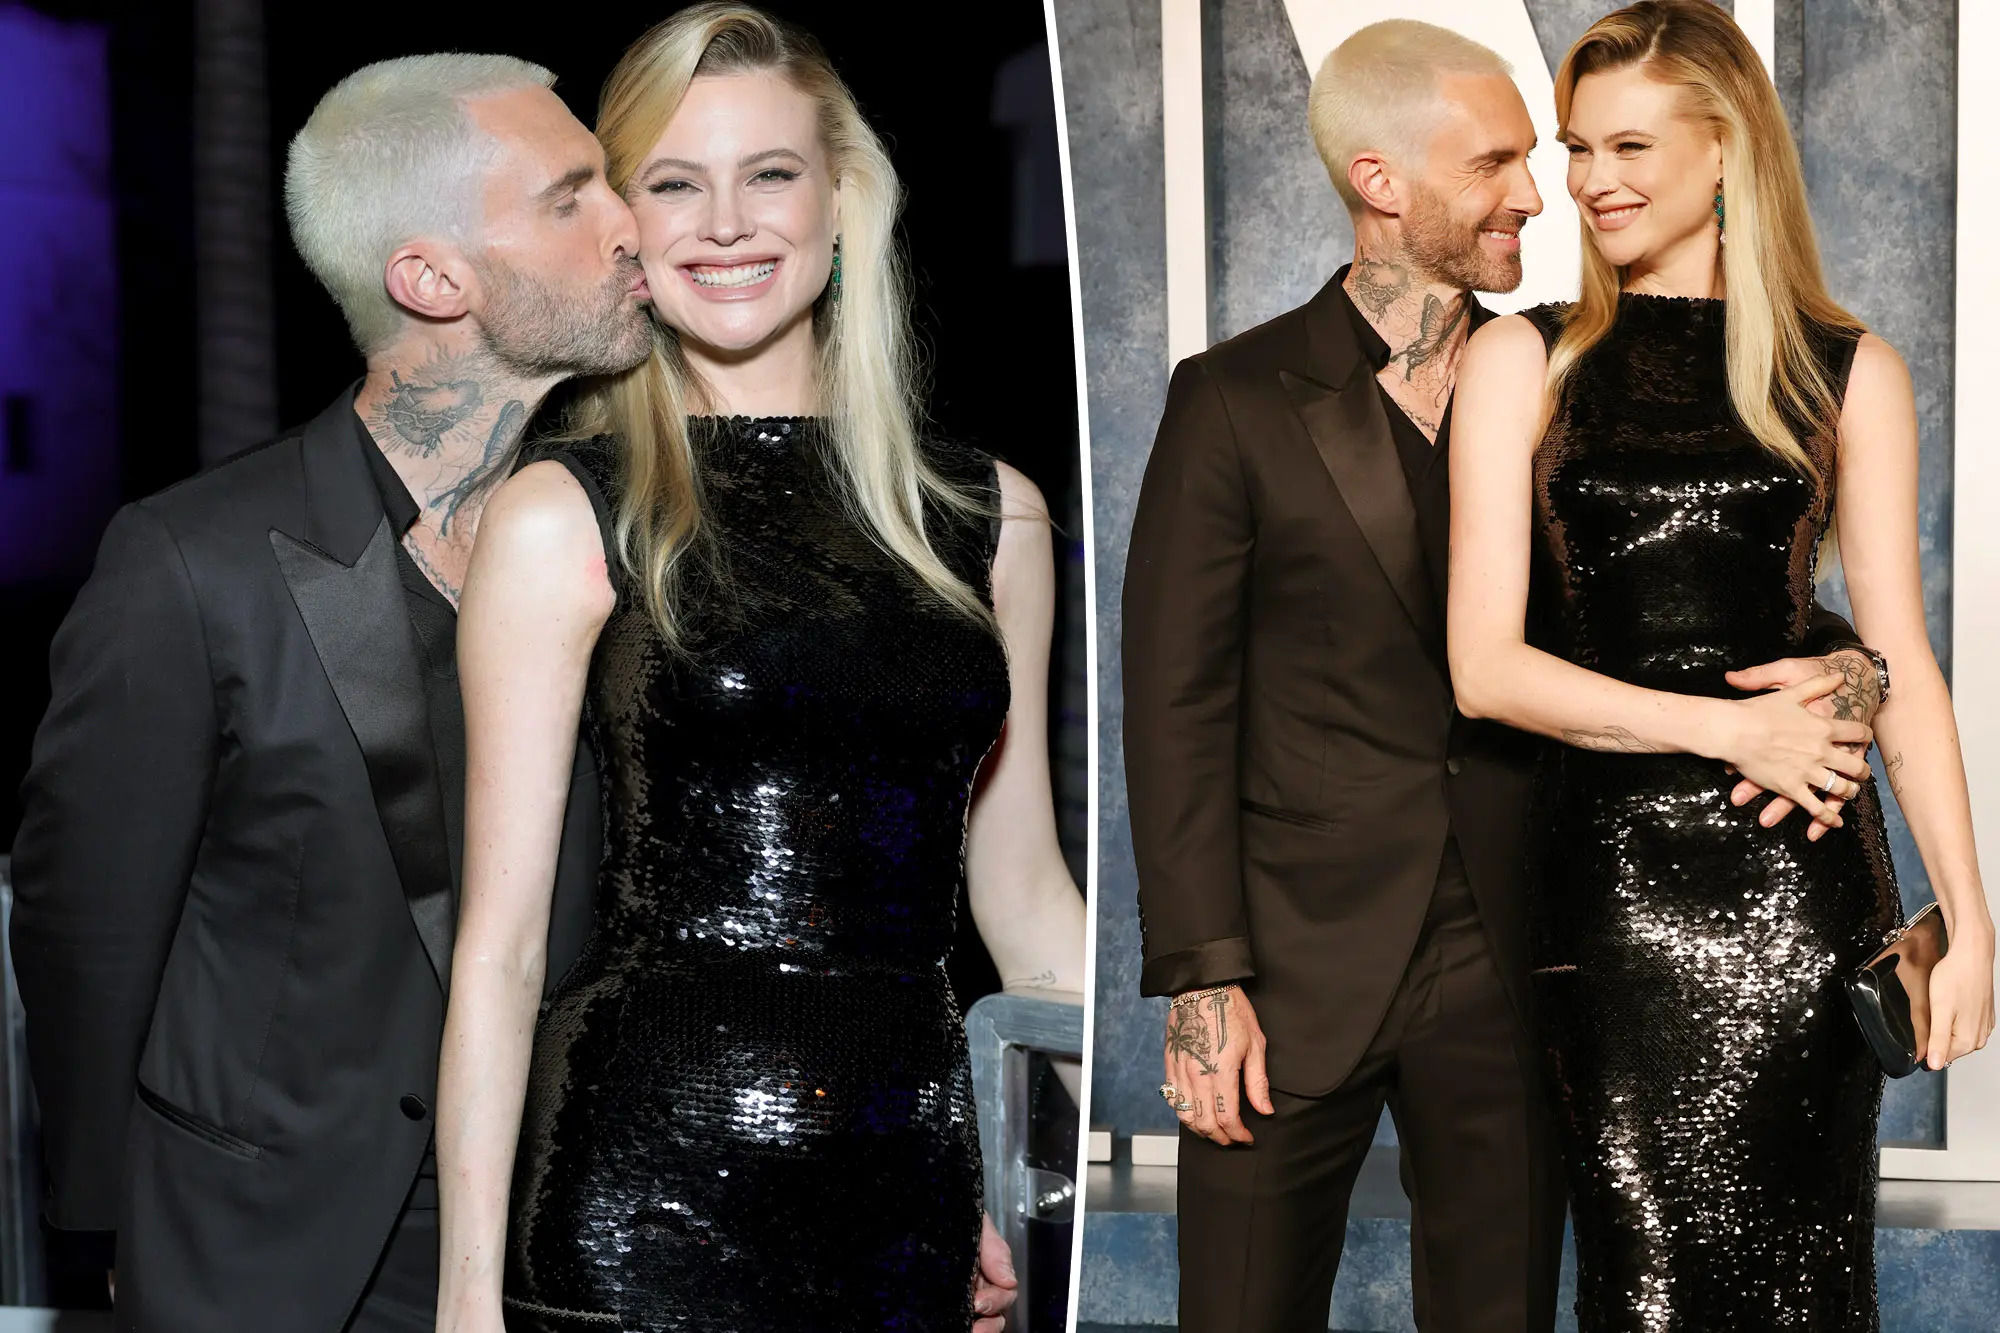 Behati Prinsloo and Adam Levine's Family Grows: Supermodel Shares First Look at Third Baby!